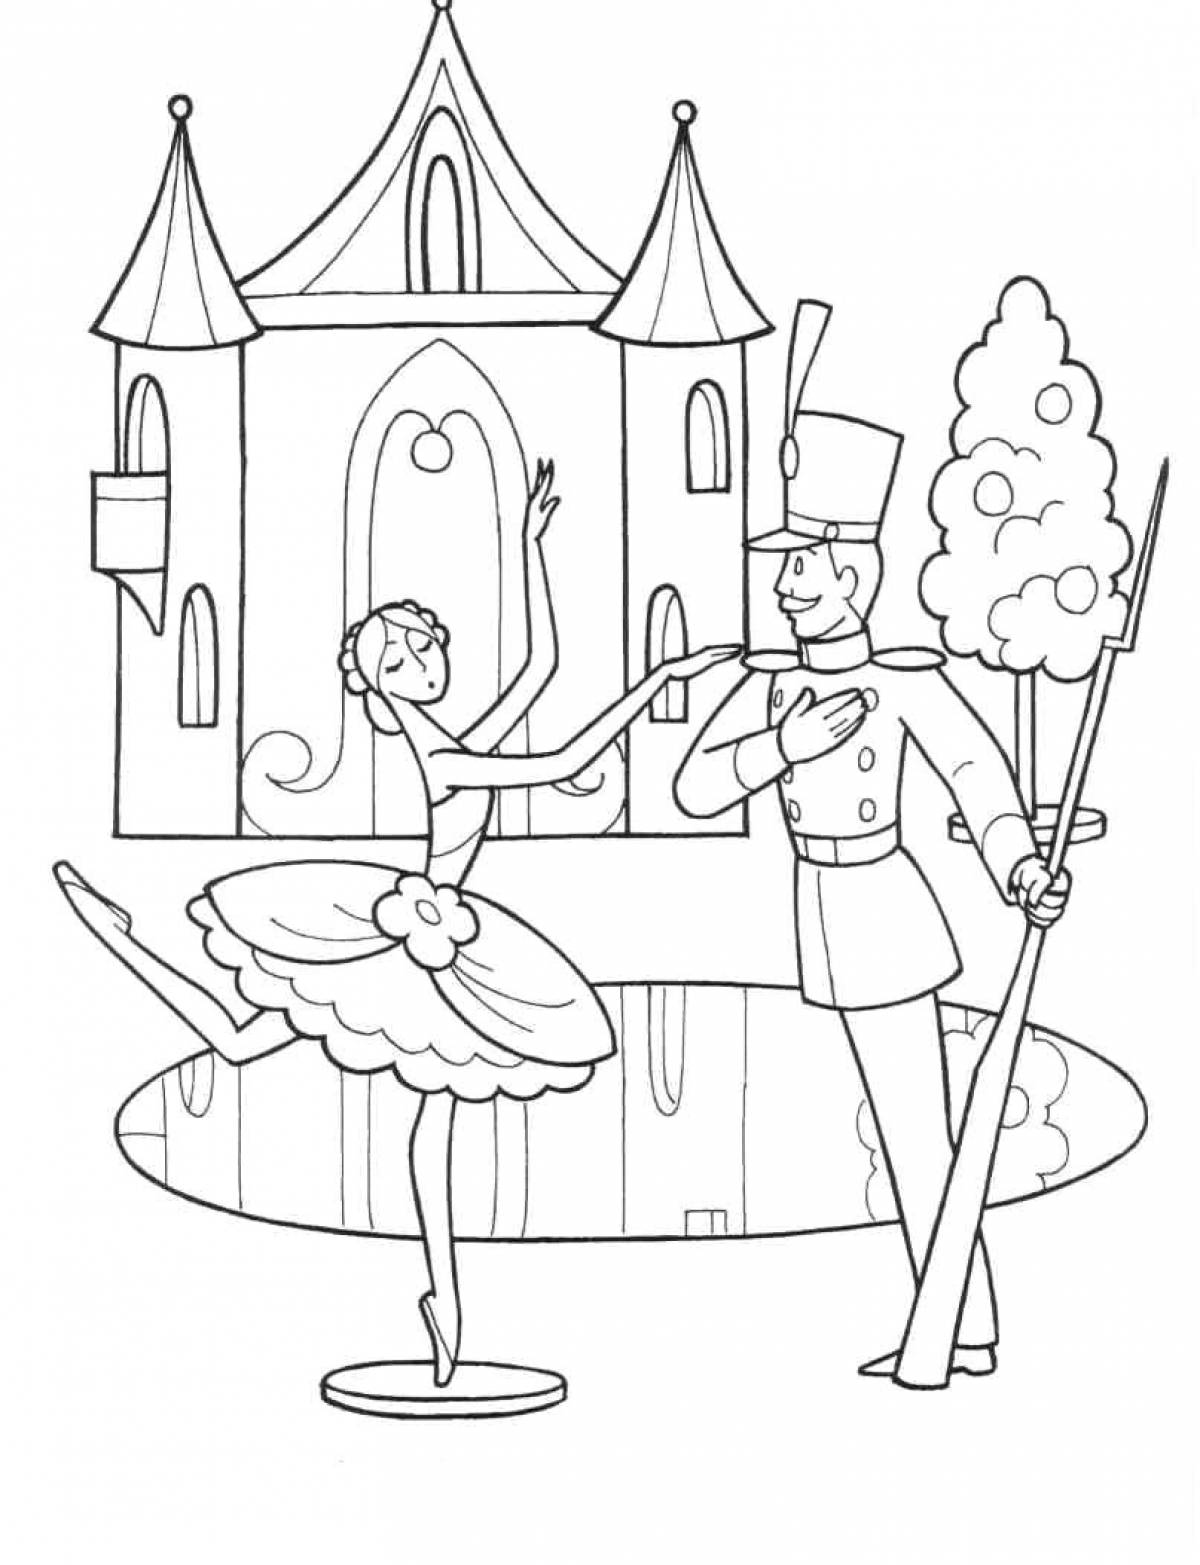 Tin soldier drawing